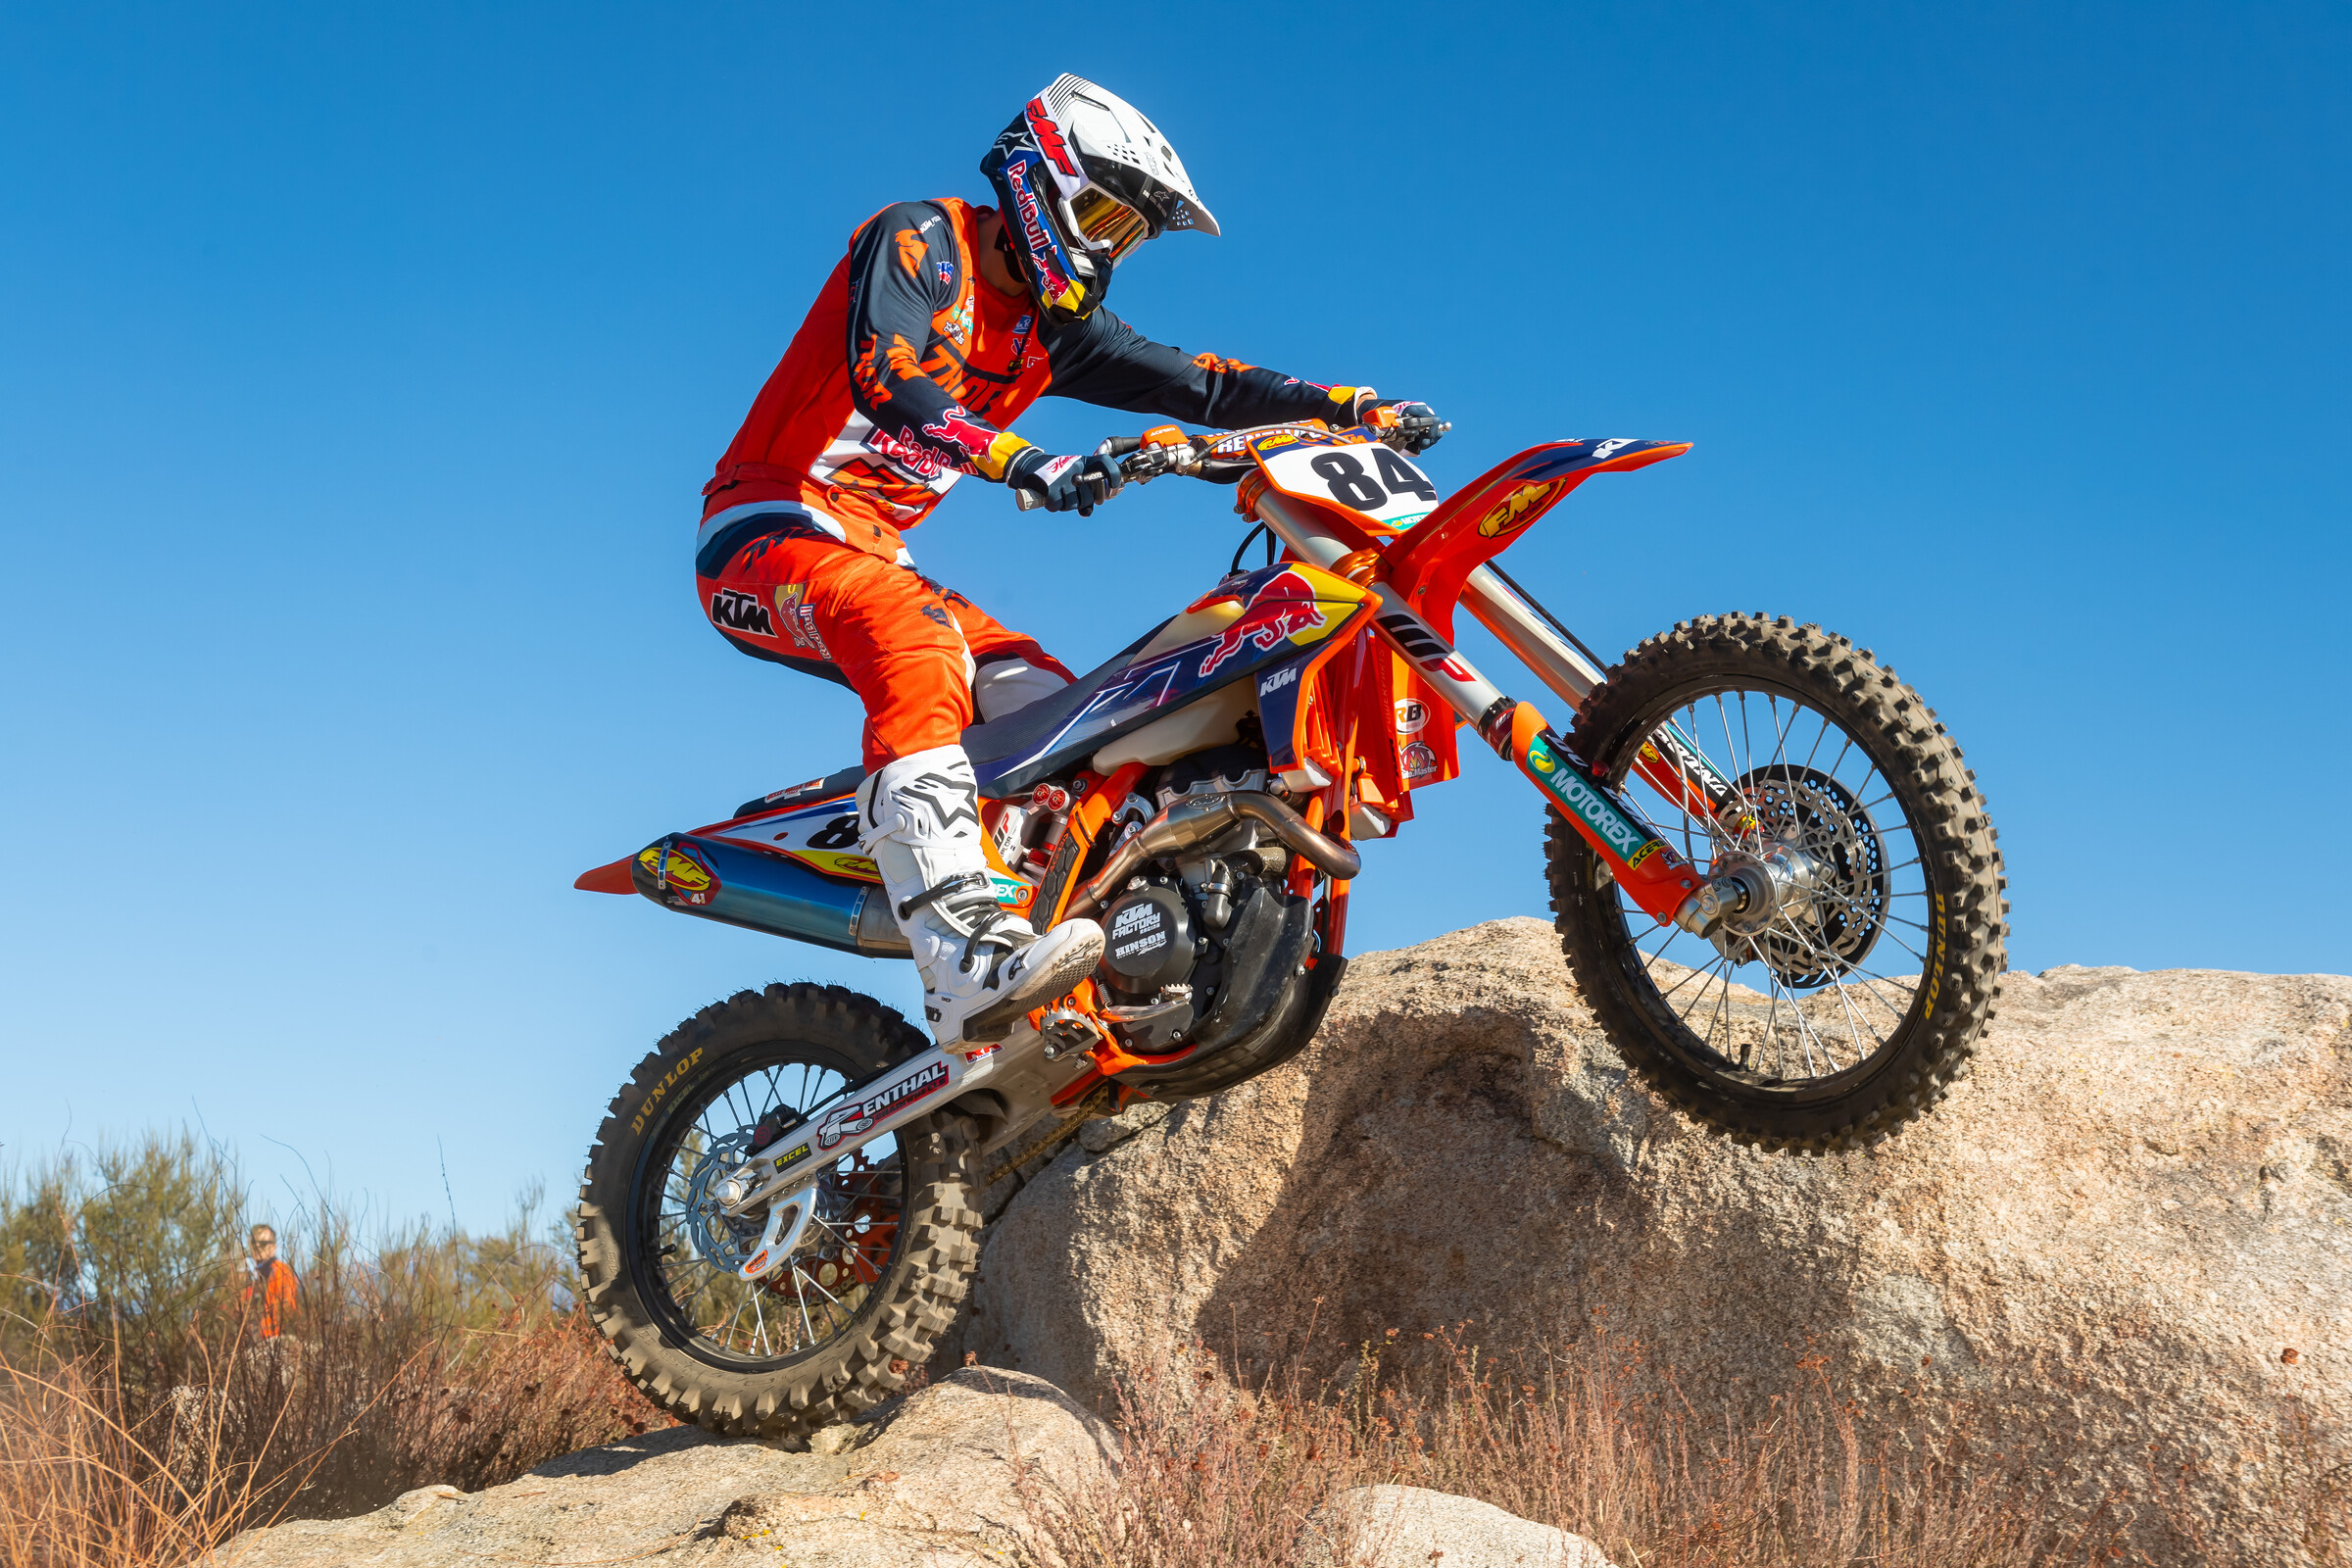 Trystan Hart and the FMF Vision